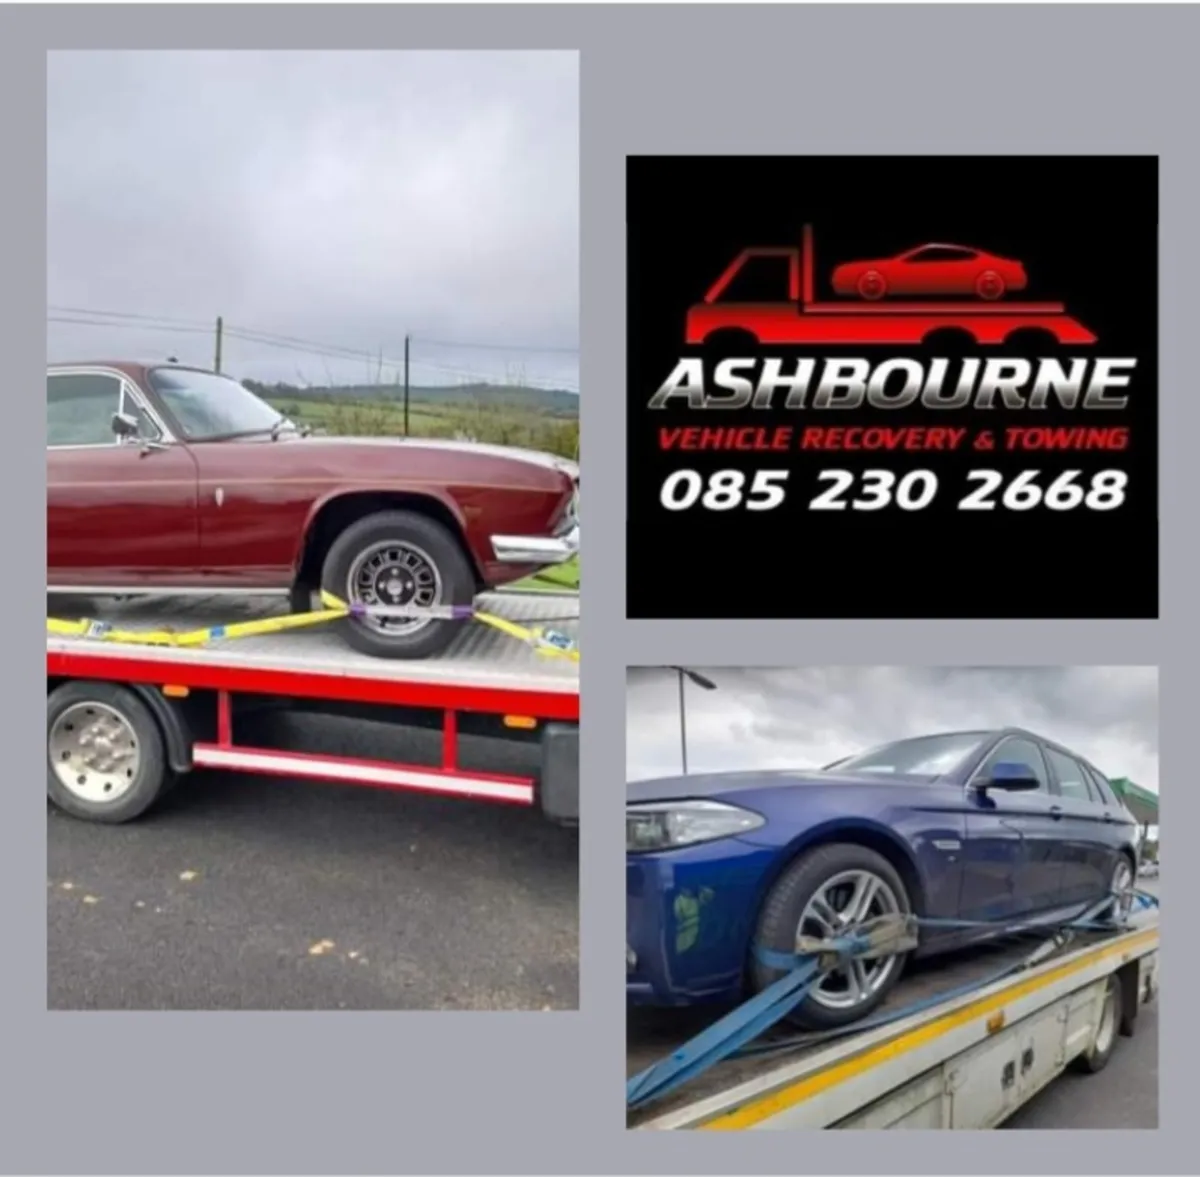 Breakdown and Recovery Based in Meath